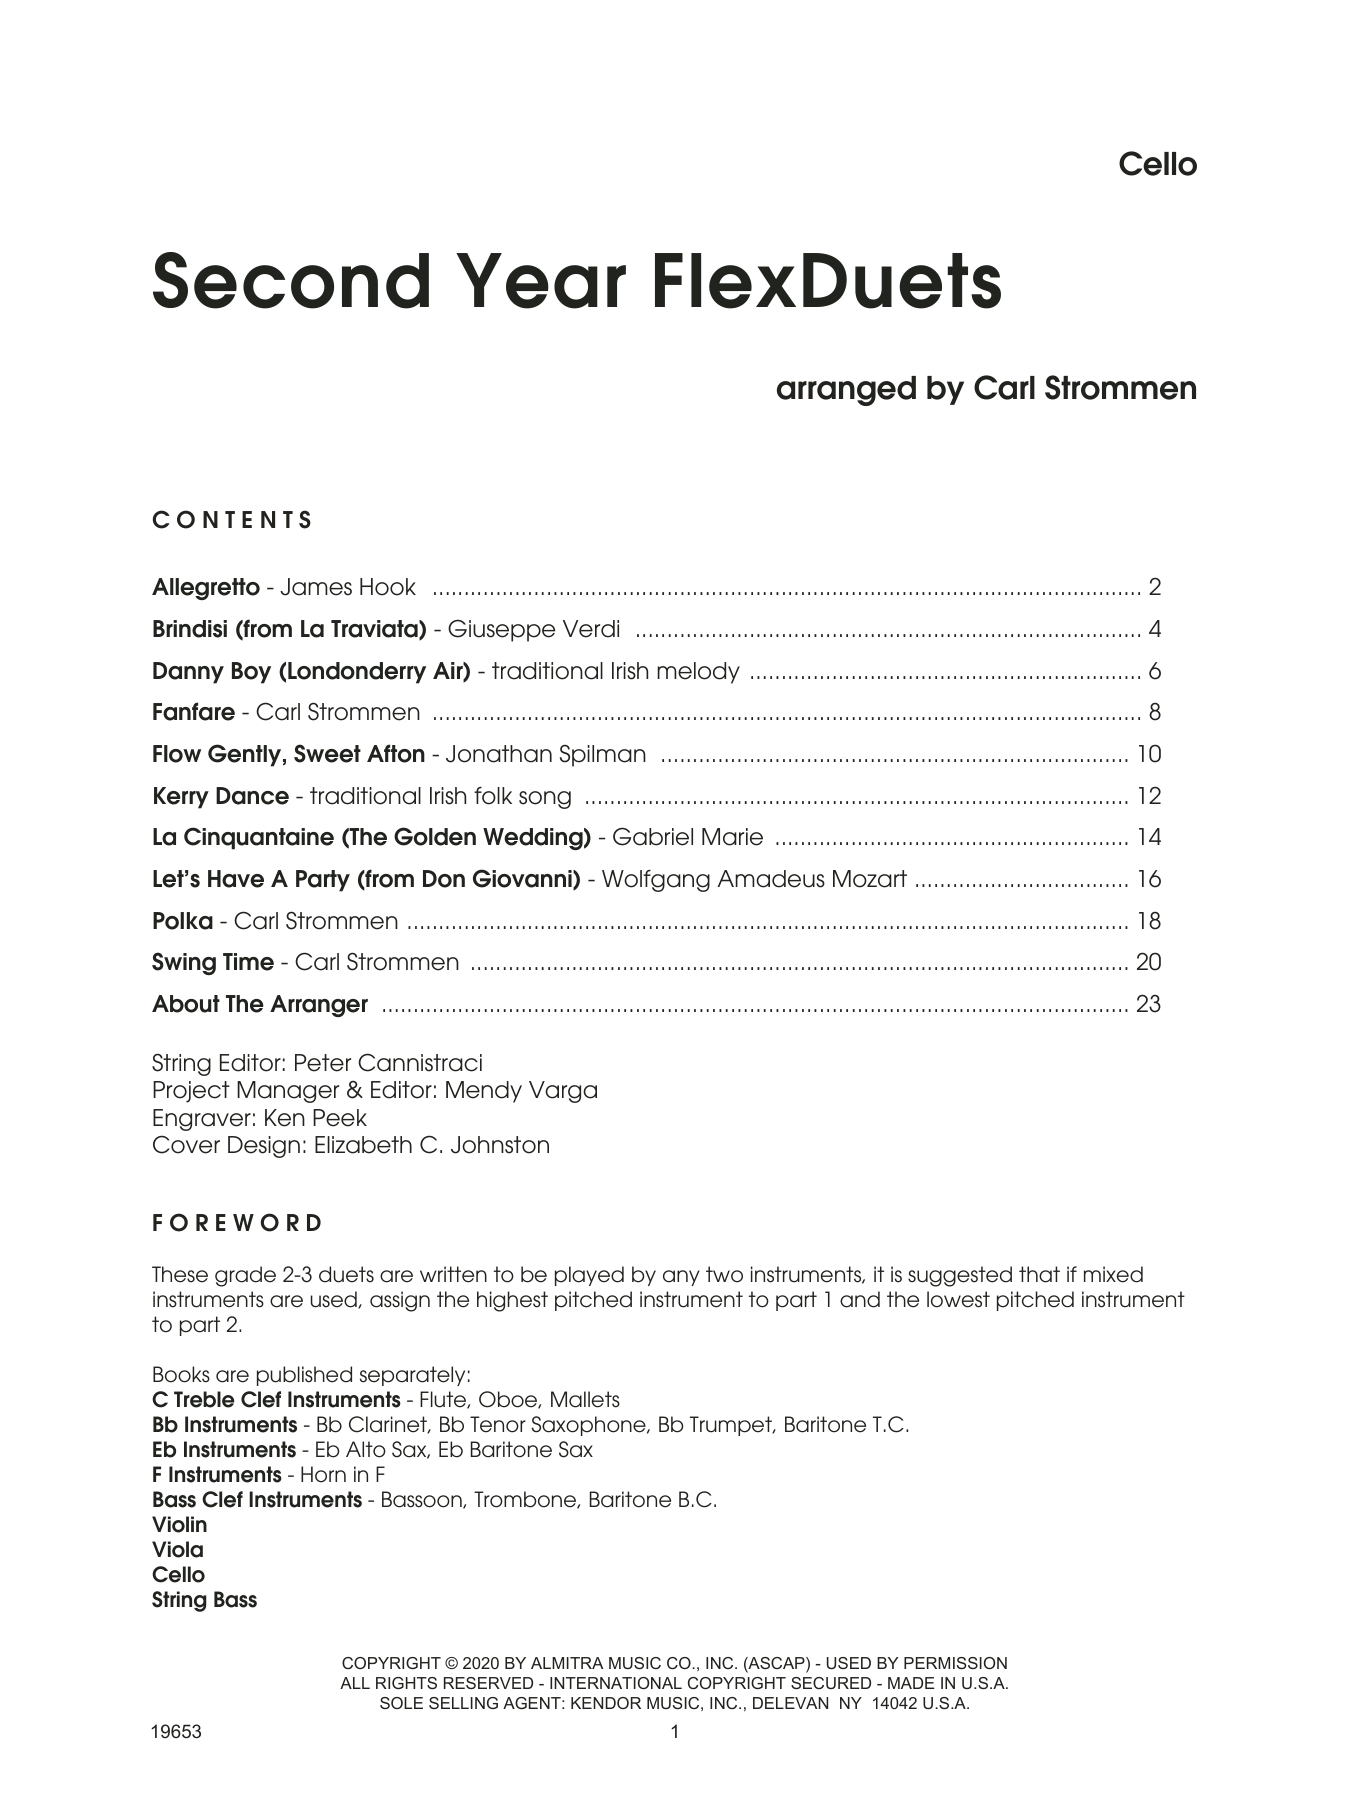 Download Carl Strommen Second Year FlexDuets - Cello sheet music and printable PDF score & Classical music notes